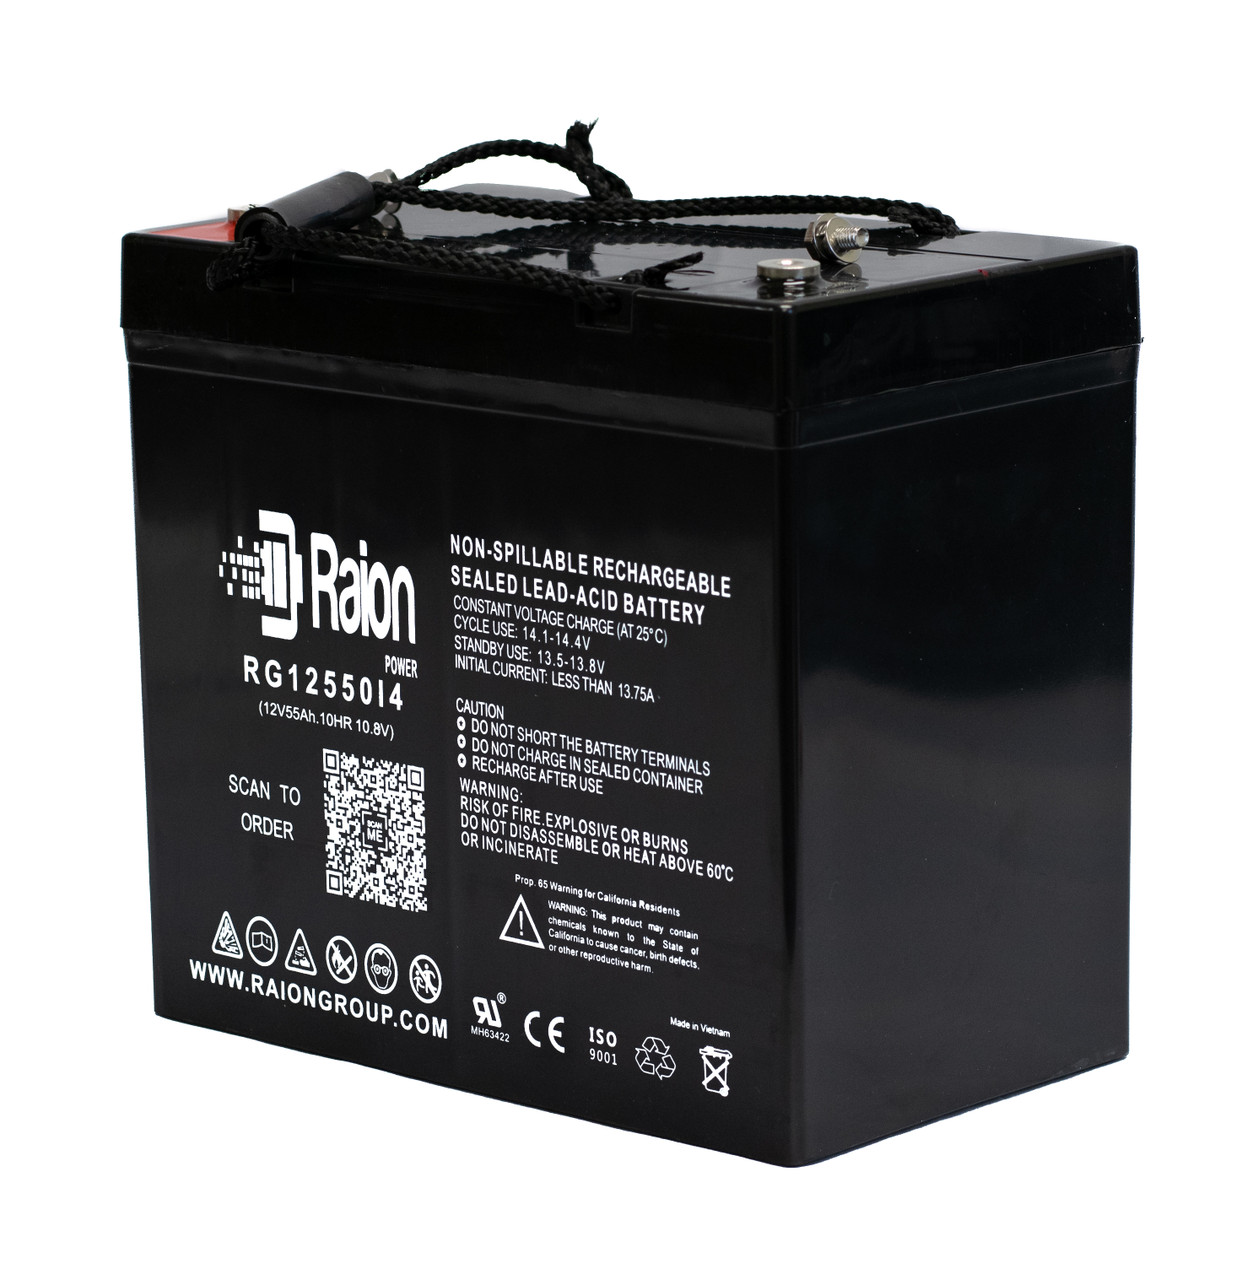 Raion Power Replacement 12V 55Ah Battery for Bright Way Group BW 12550 IT - 1 Pack